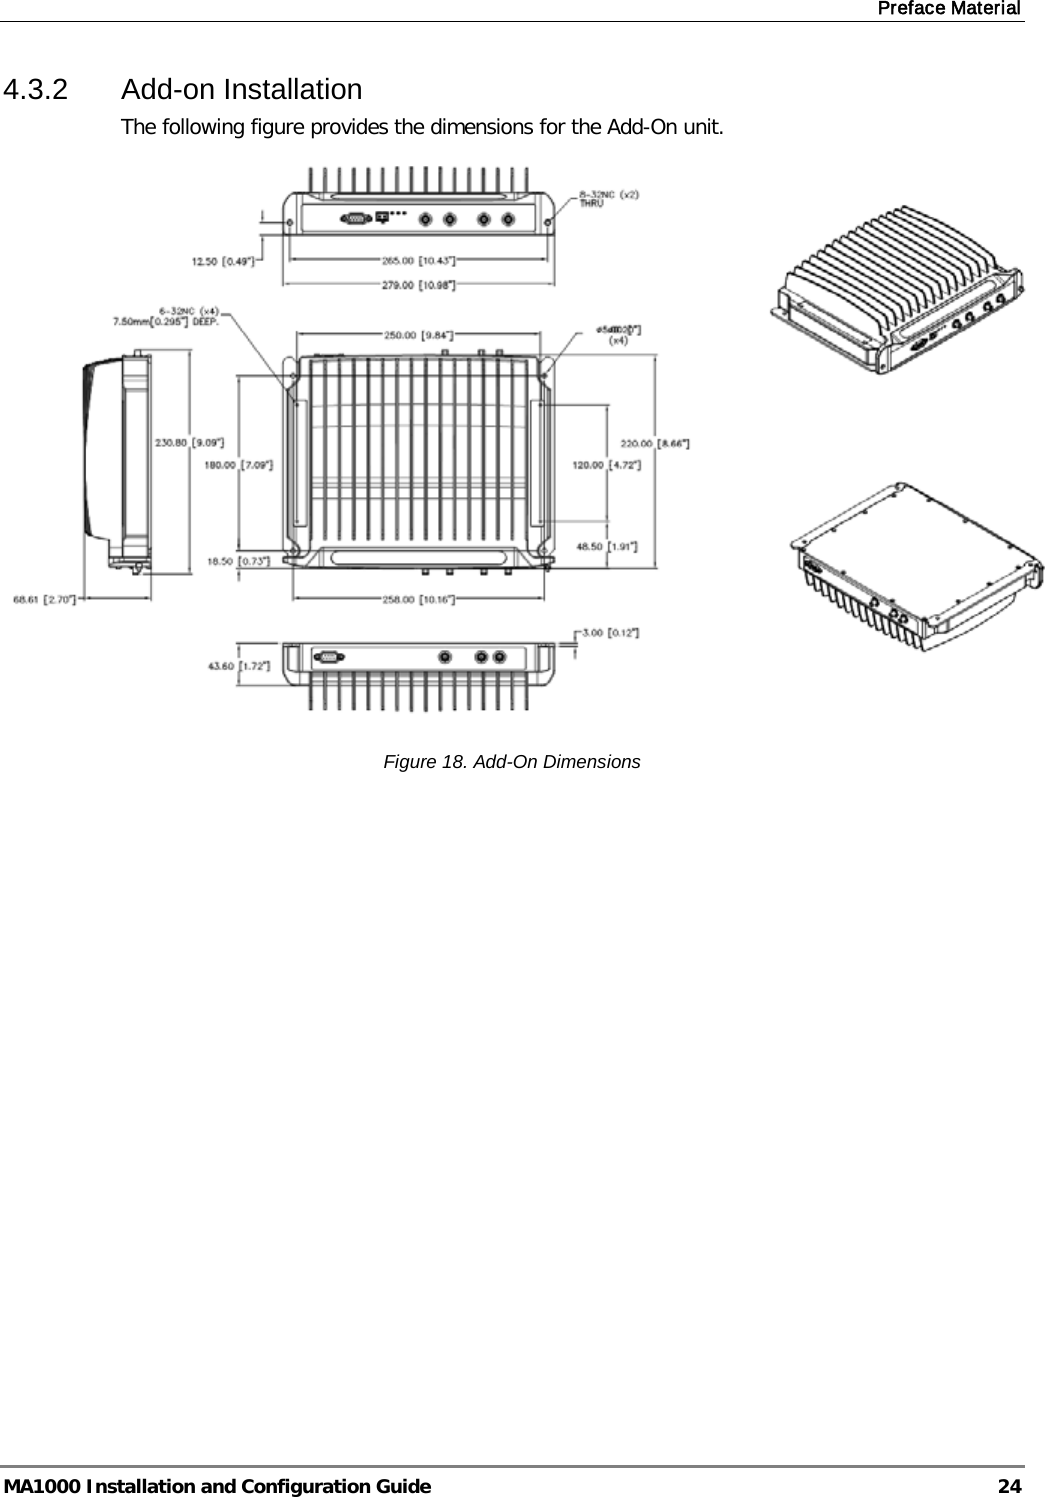 Preface Material  MA1000 Installation and Configuration Guide  24 4.3.2  Add-on Installation The following figure provides the dimensions for the Add-On unit.  Figure 18. Add-On Dimensions    